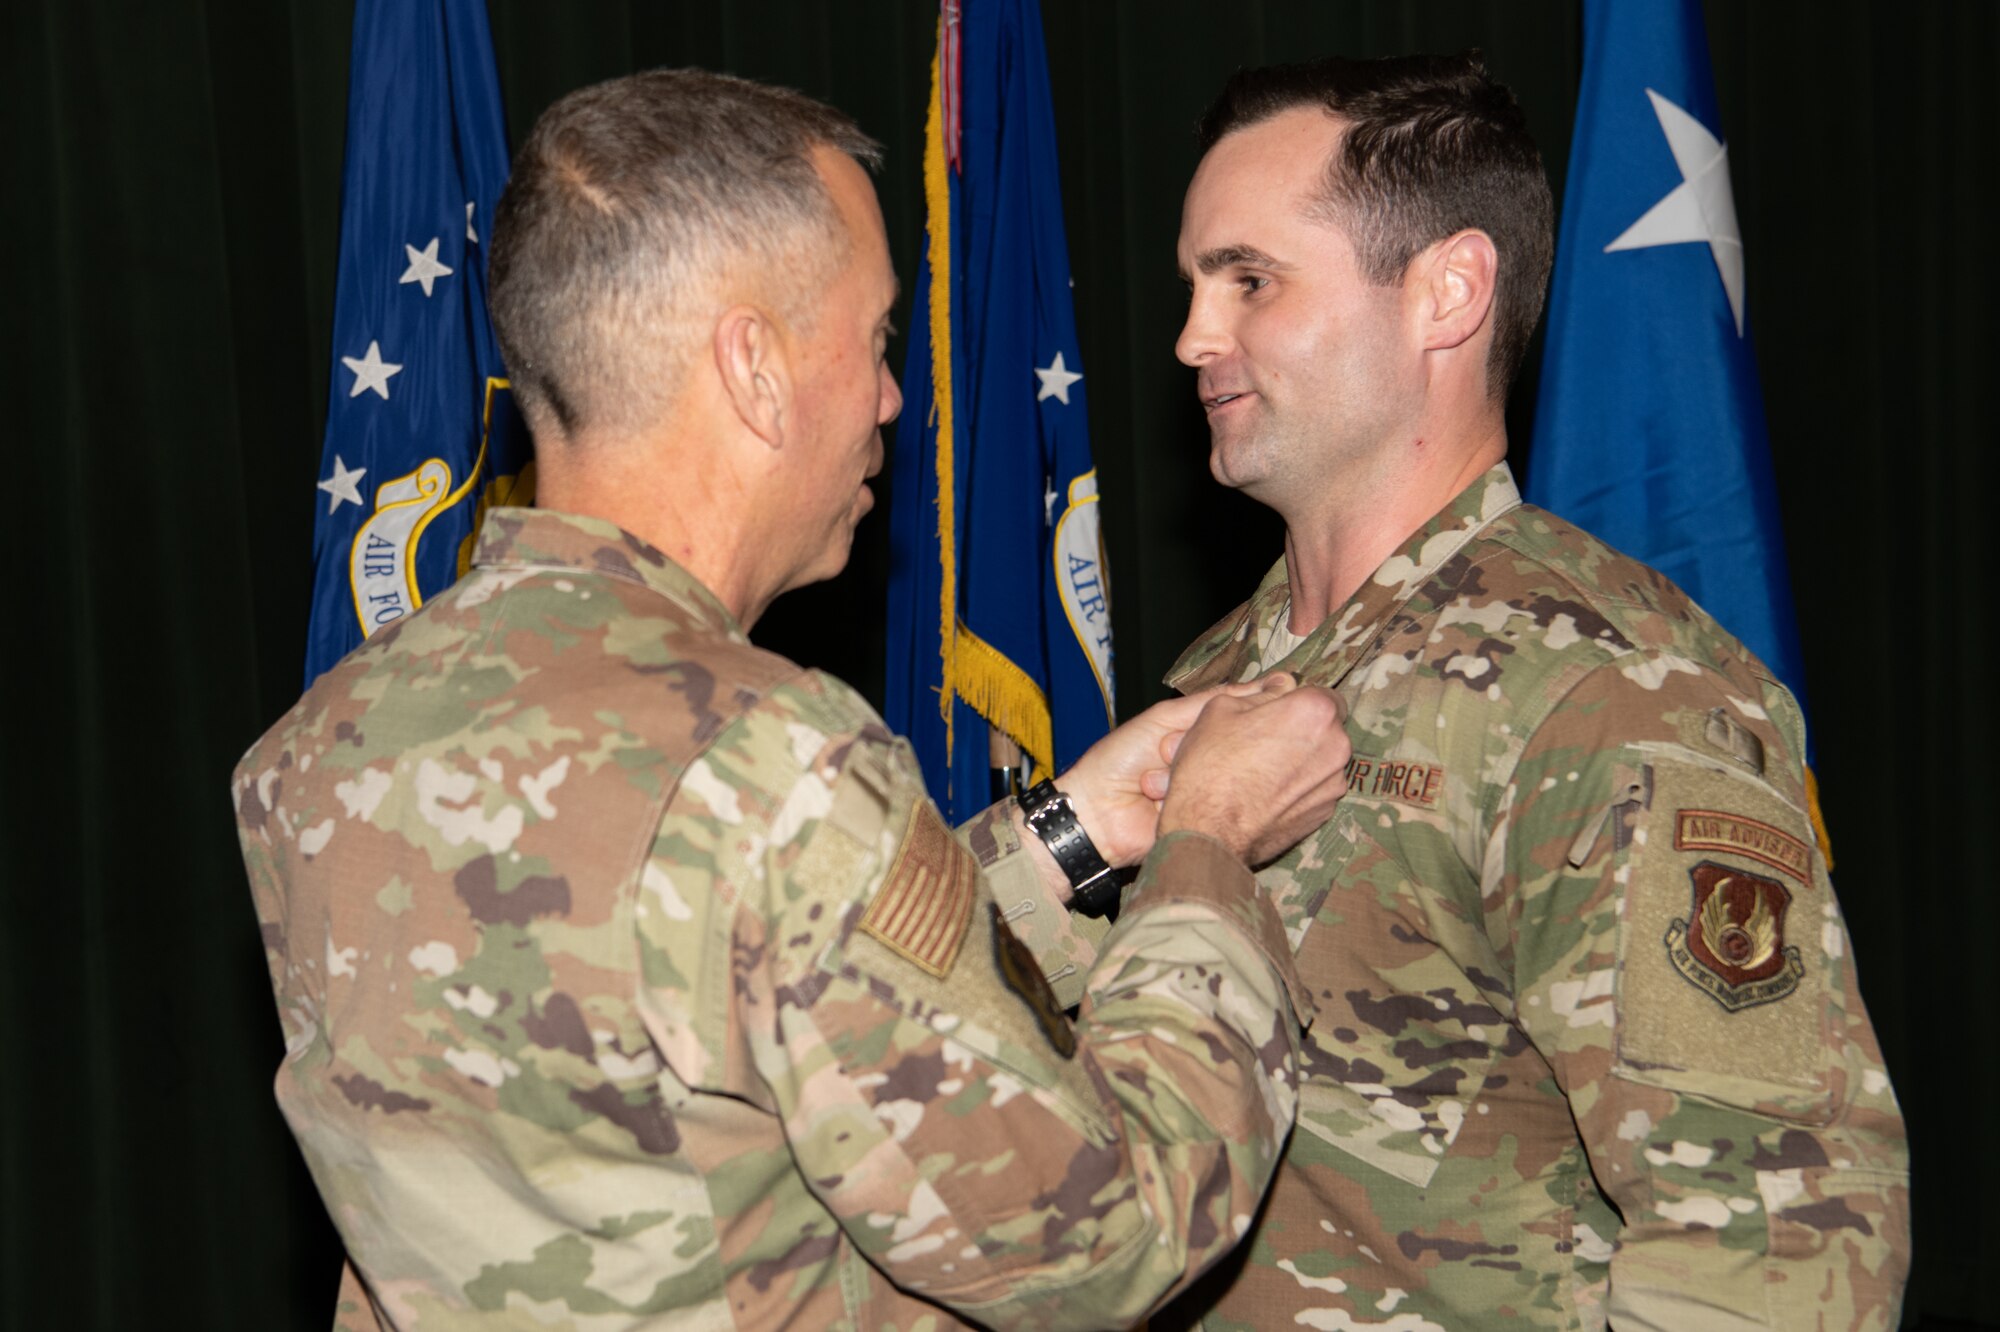 Maj. Gen. Tom Wilcox, Air Force Installation and Mission Support Center commander, awards the Bronze Star to Capt. Shane Lockridge at a commander’s call Feb. 13.